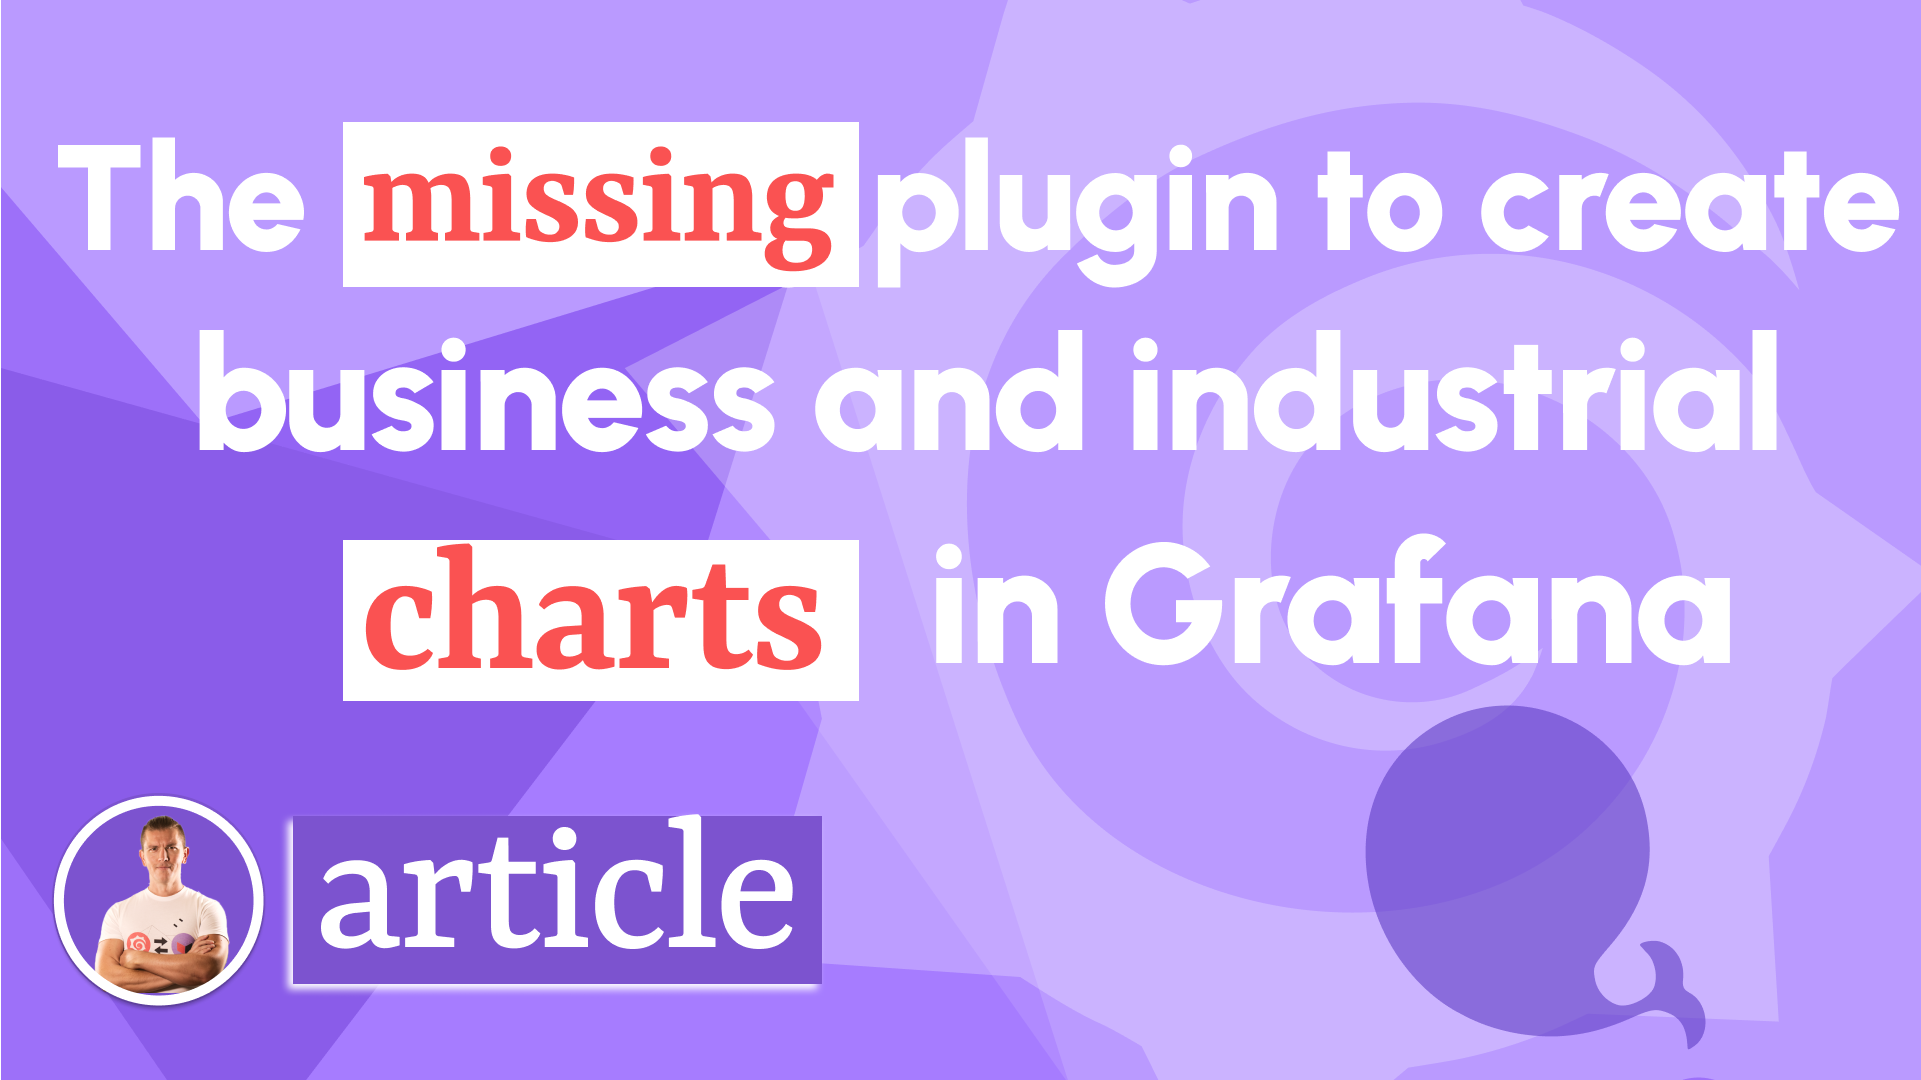 The missing plugin to create business and industrial charts in Grafana